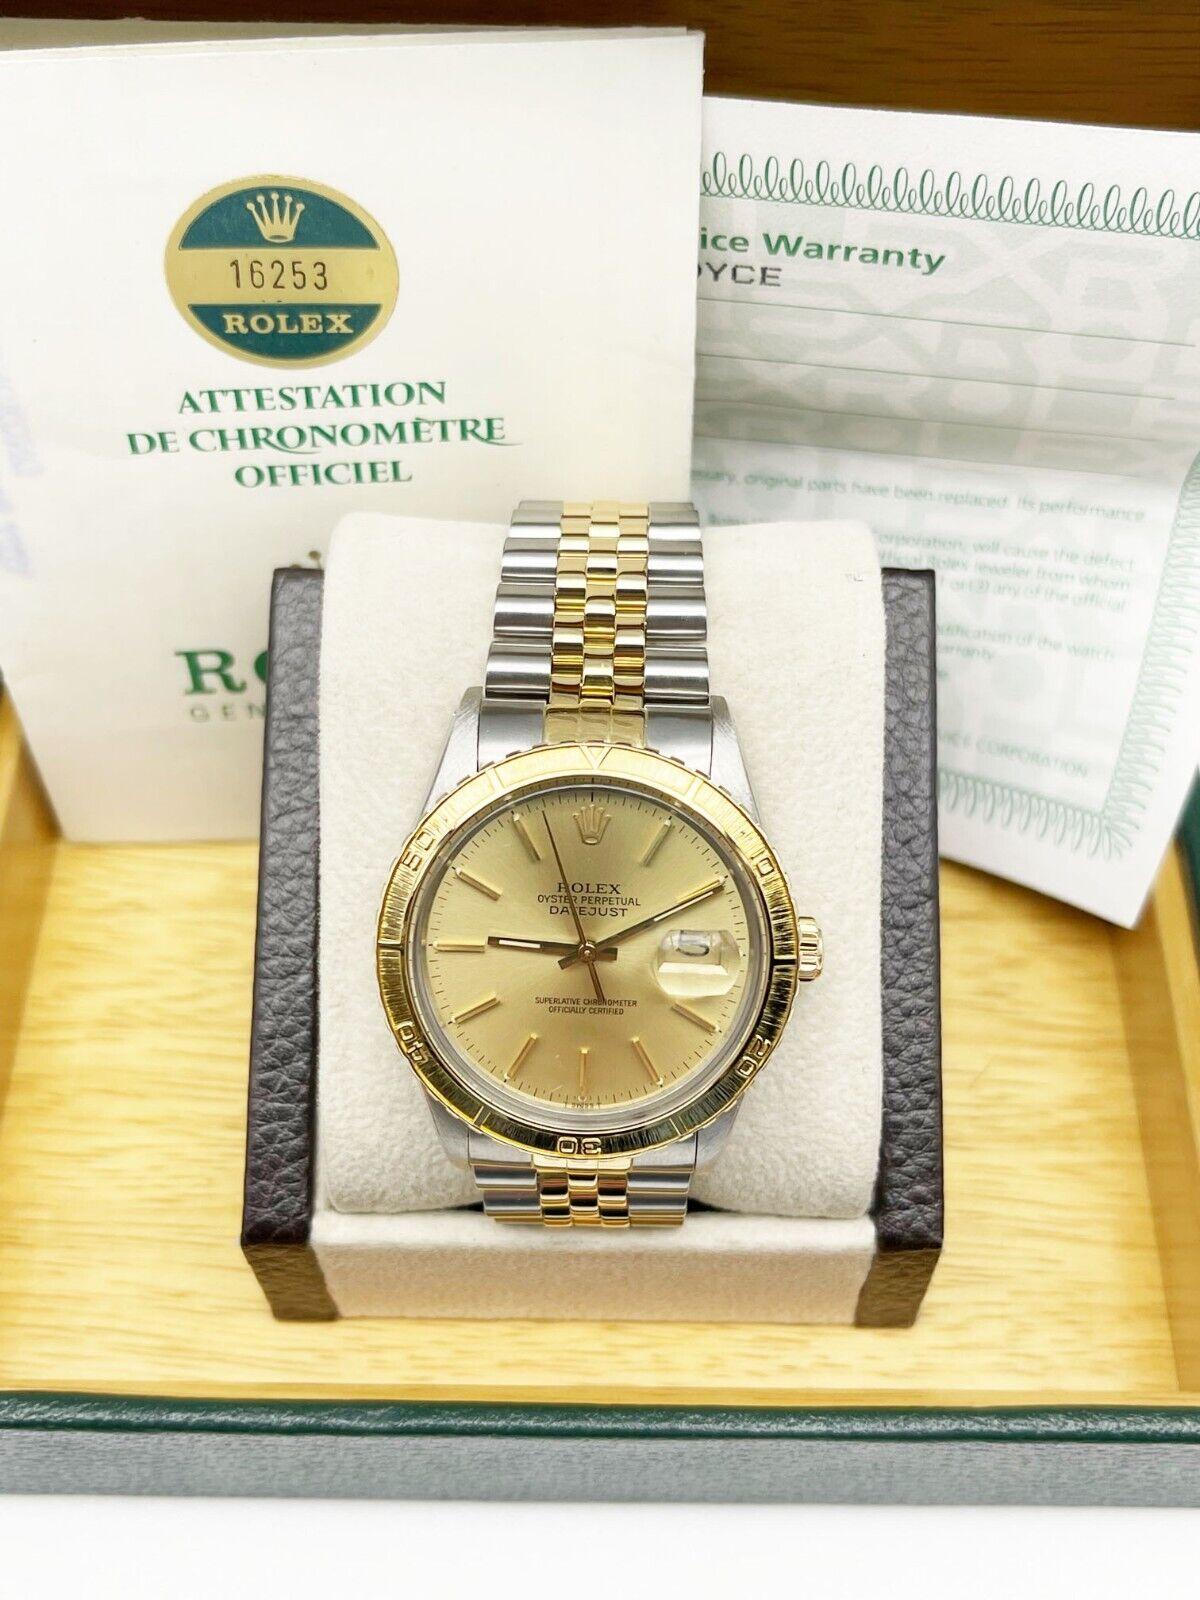 Style Number: 16253

 

Serial: 8225***

 

Model: Datejust Thunderbird

 

Case Material: Stainless Steel

 

Band: 18K Yellow Gold and Stainless Steel

 

Bezel: 18K Yellow Gold 

 

Dial: Champagne

 

Face: Acrylic

 

Case Size: 36mm

